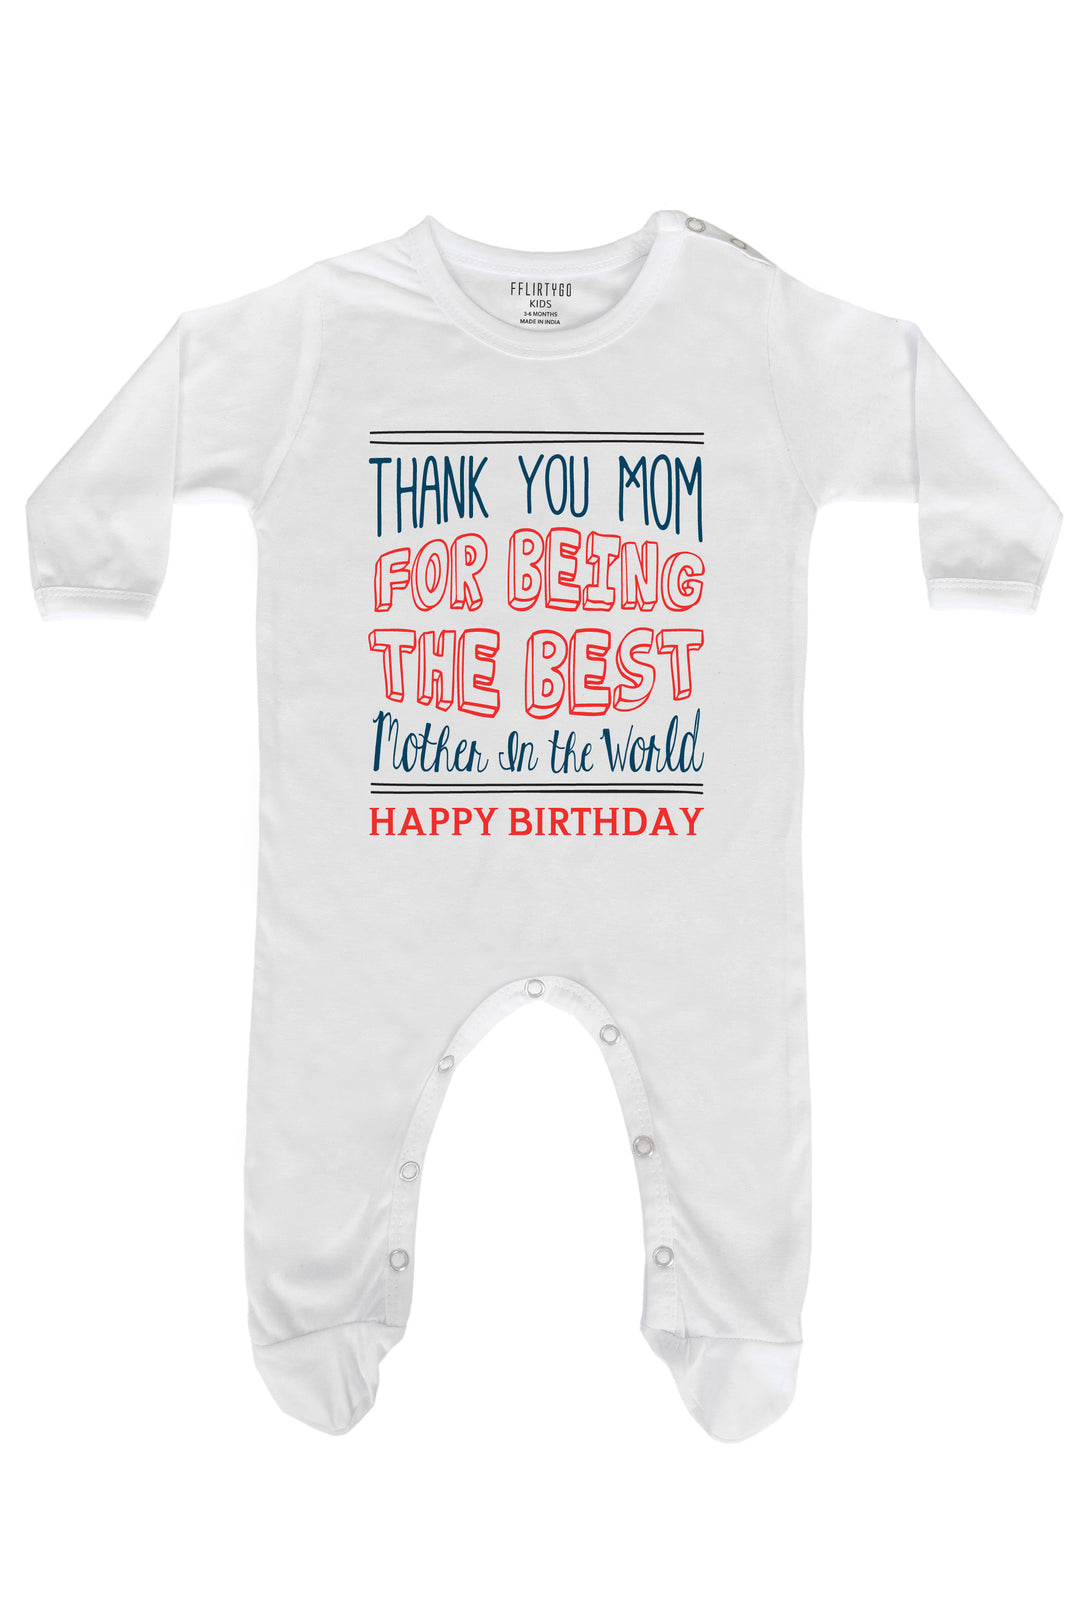 The Best Mother In The World Baby Romper | Onesies